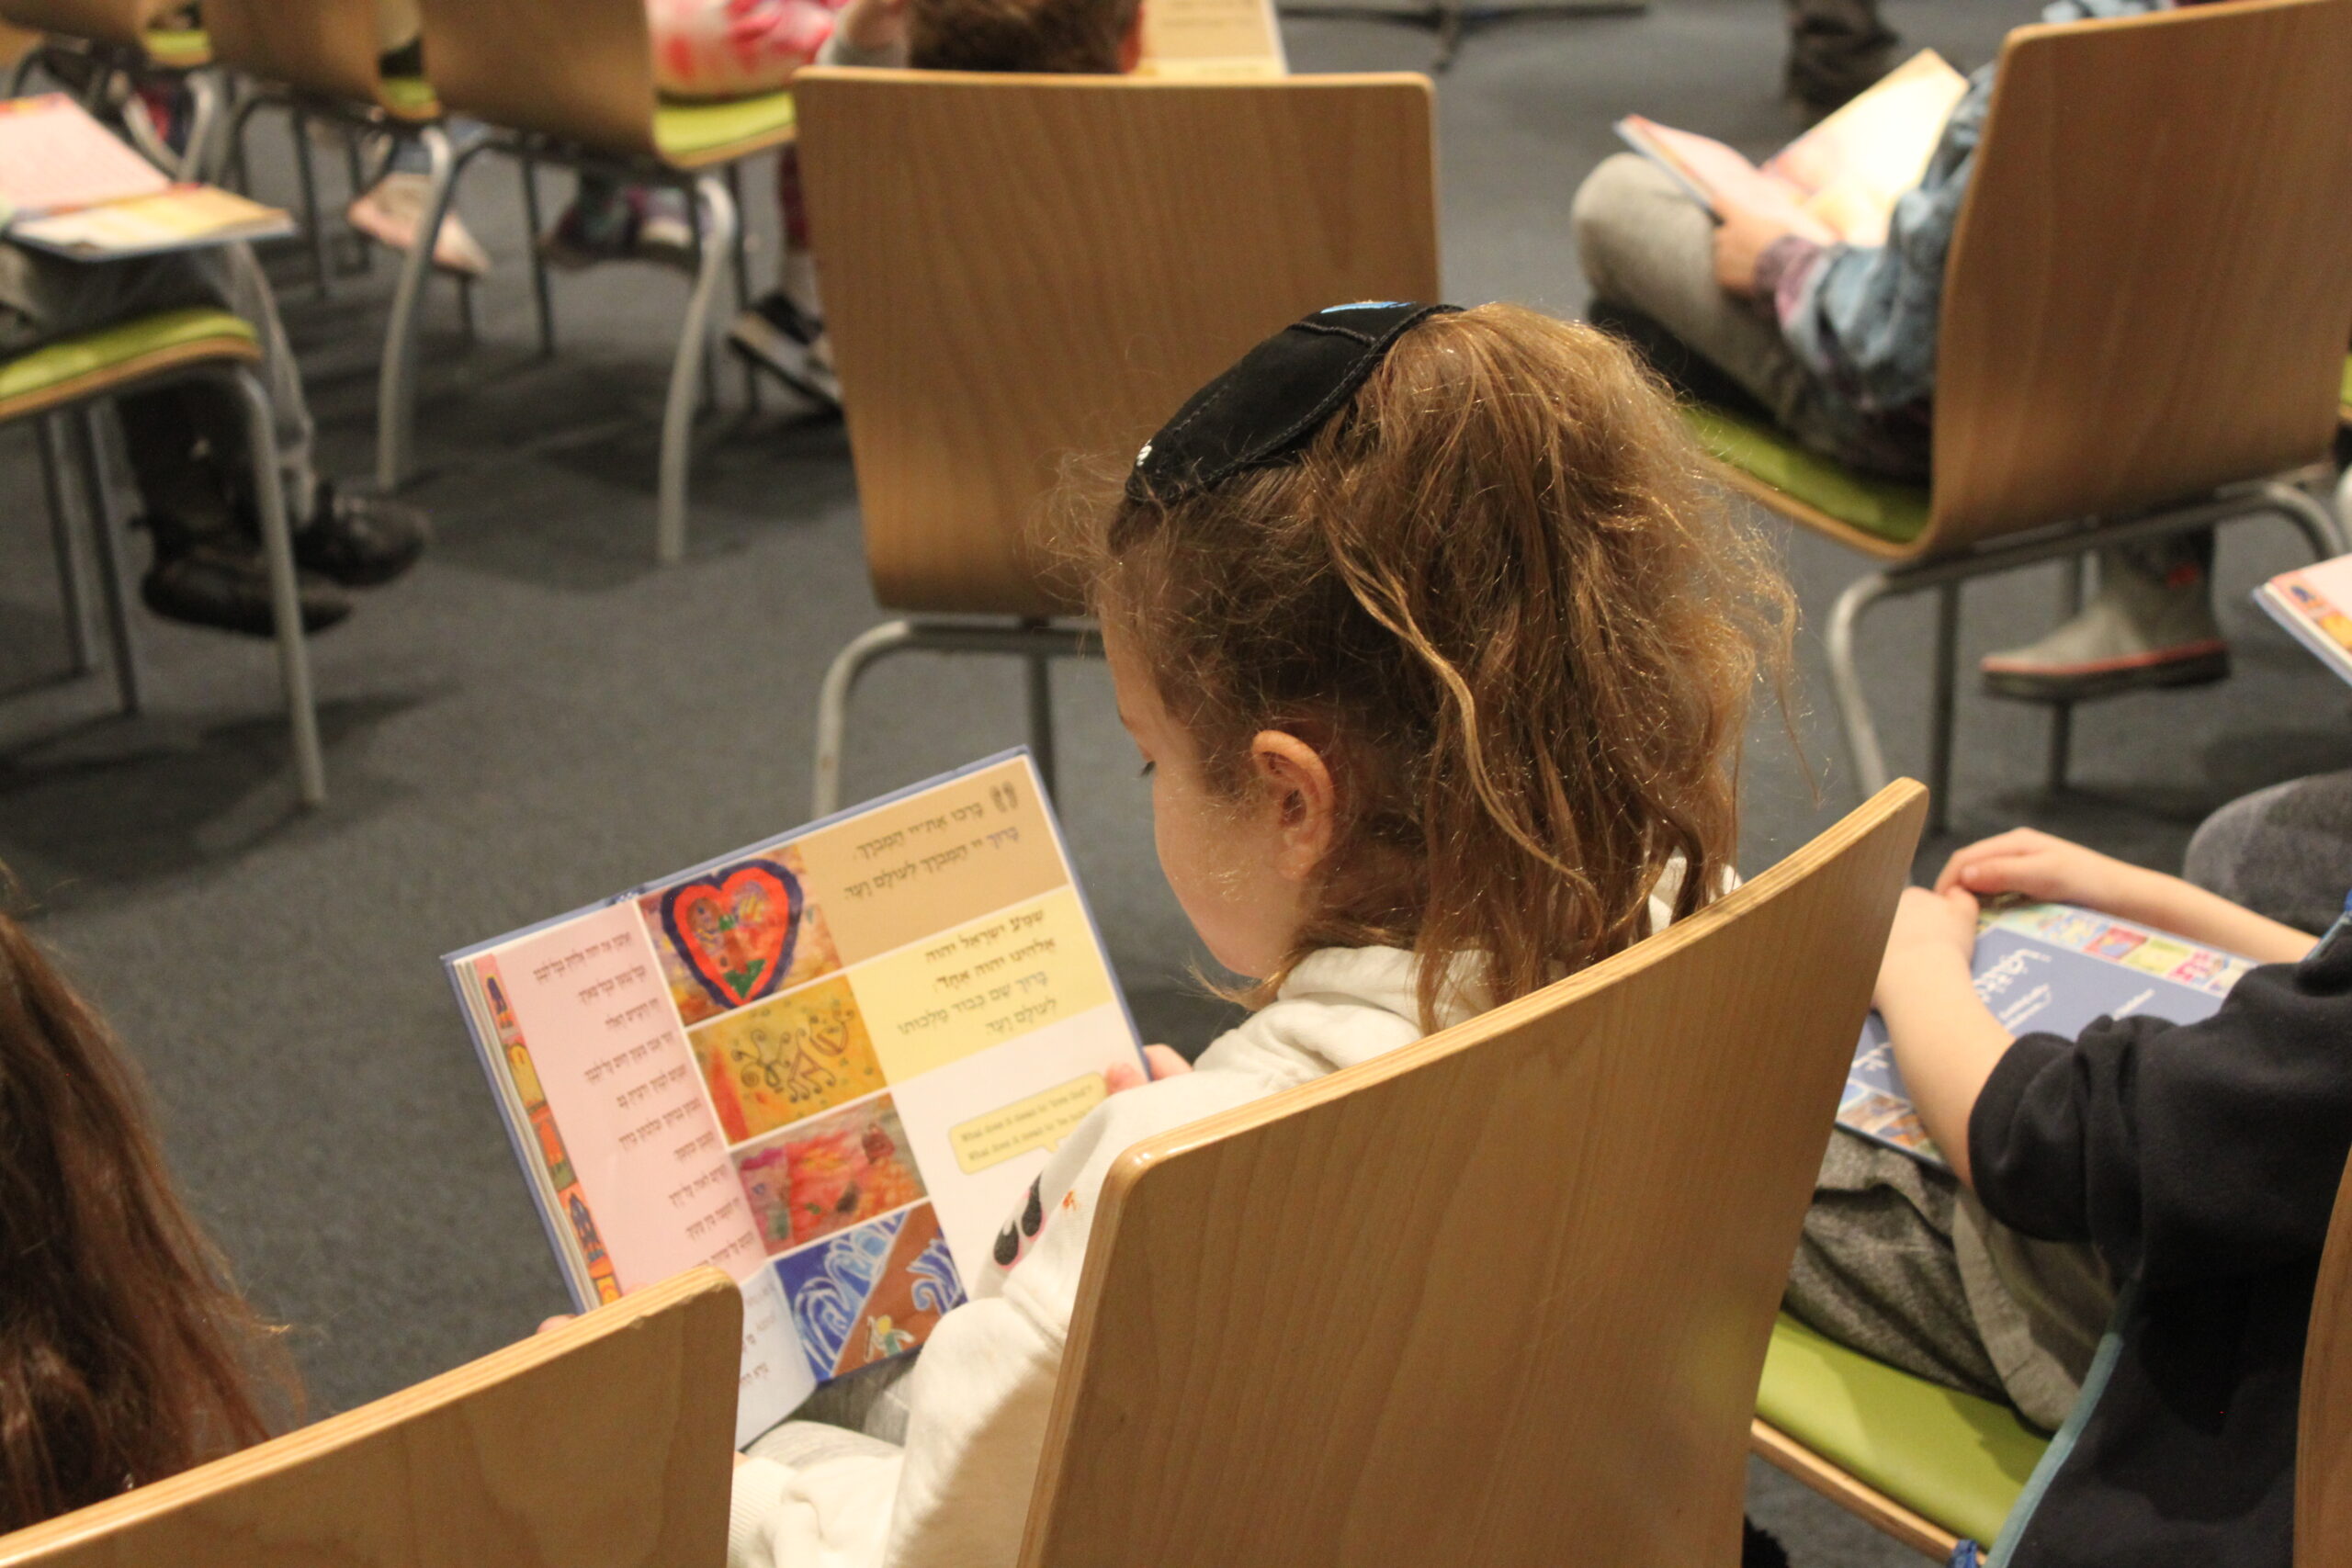 A young first or second grader sitting in a modern wooden chair, reading from a booklet along with many other children.